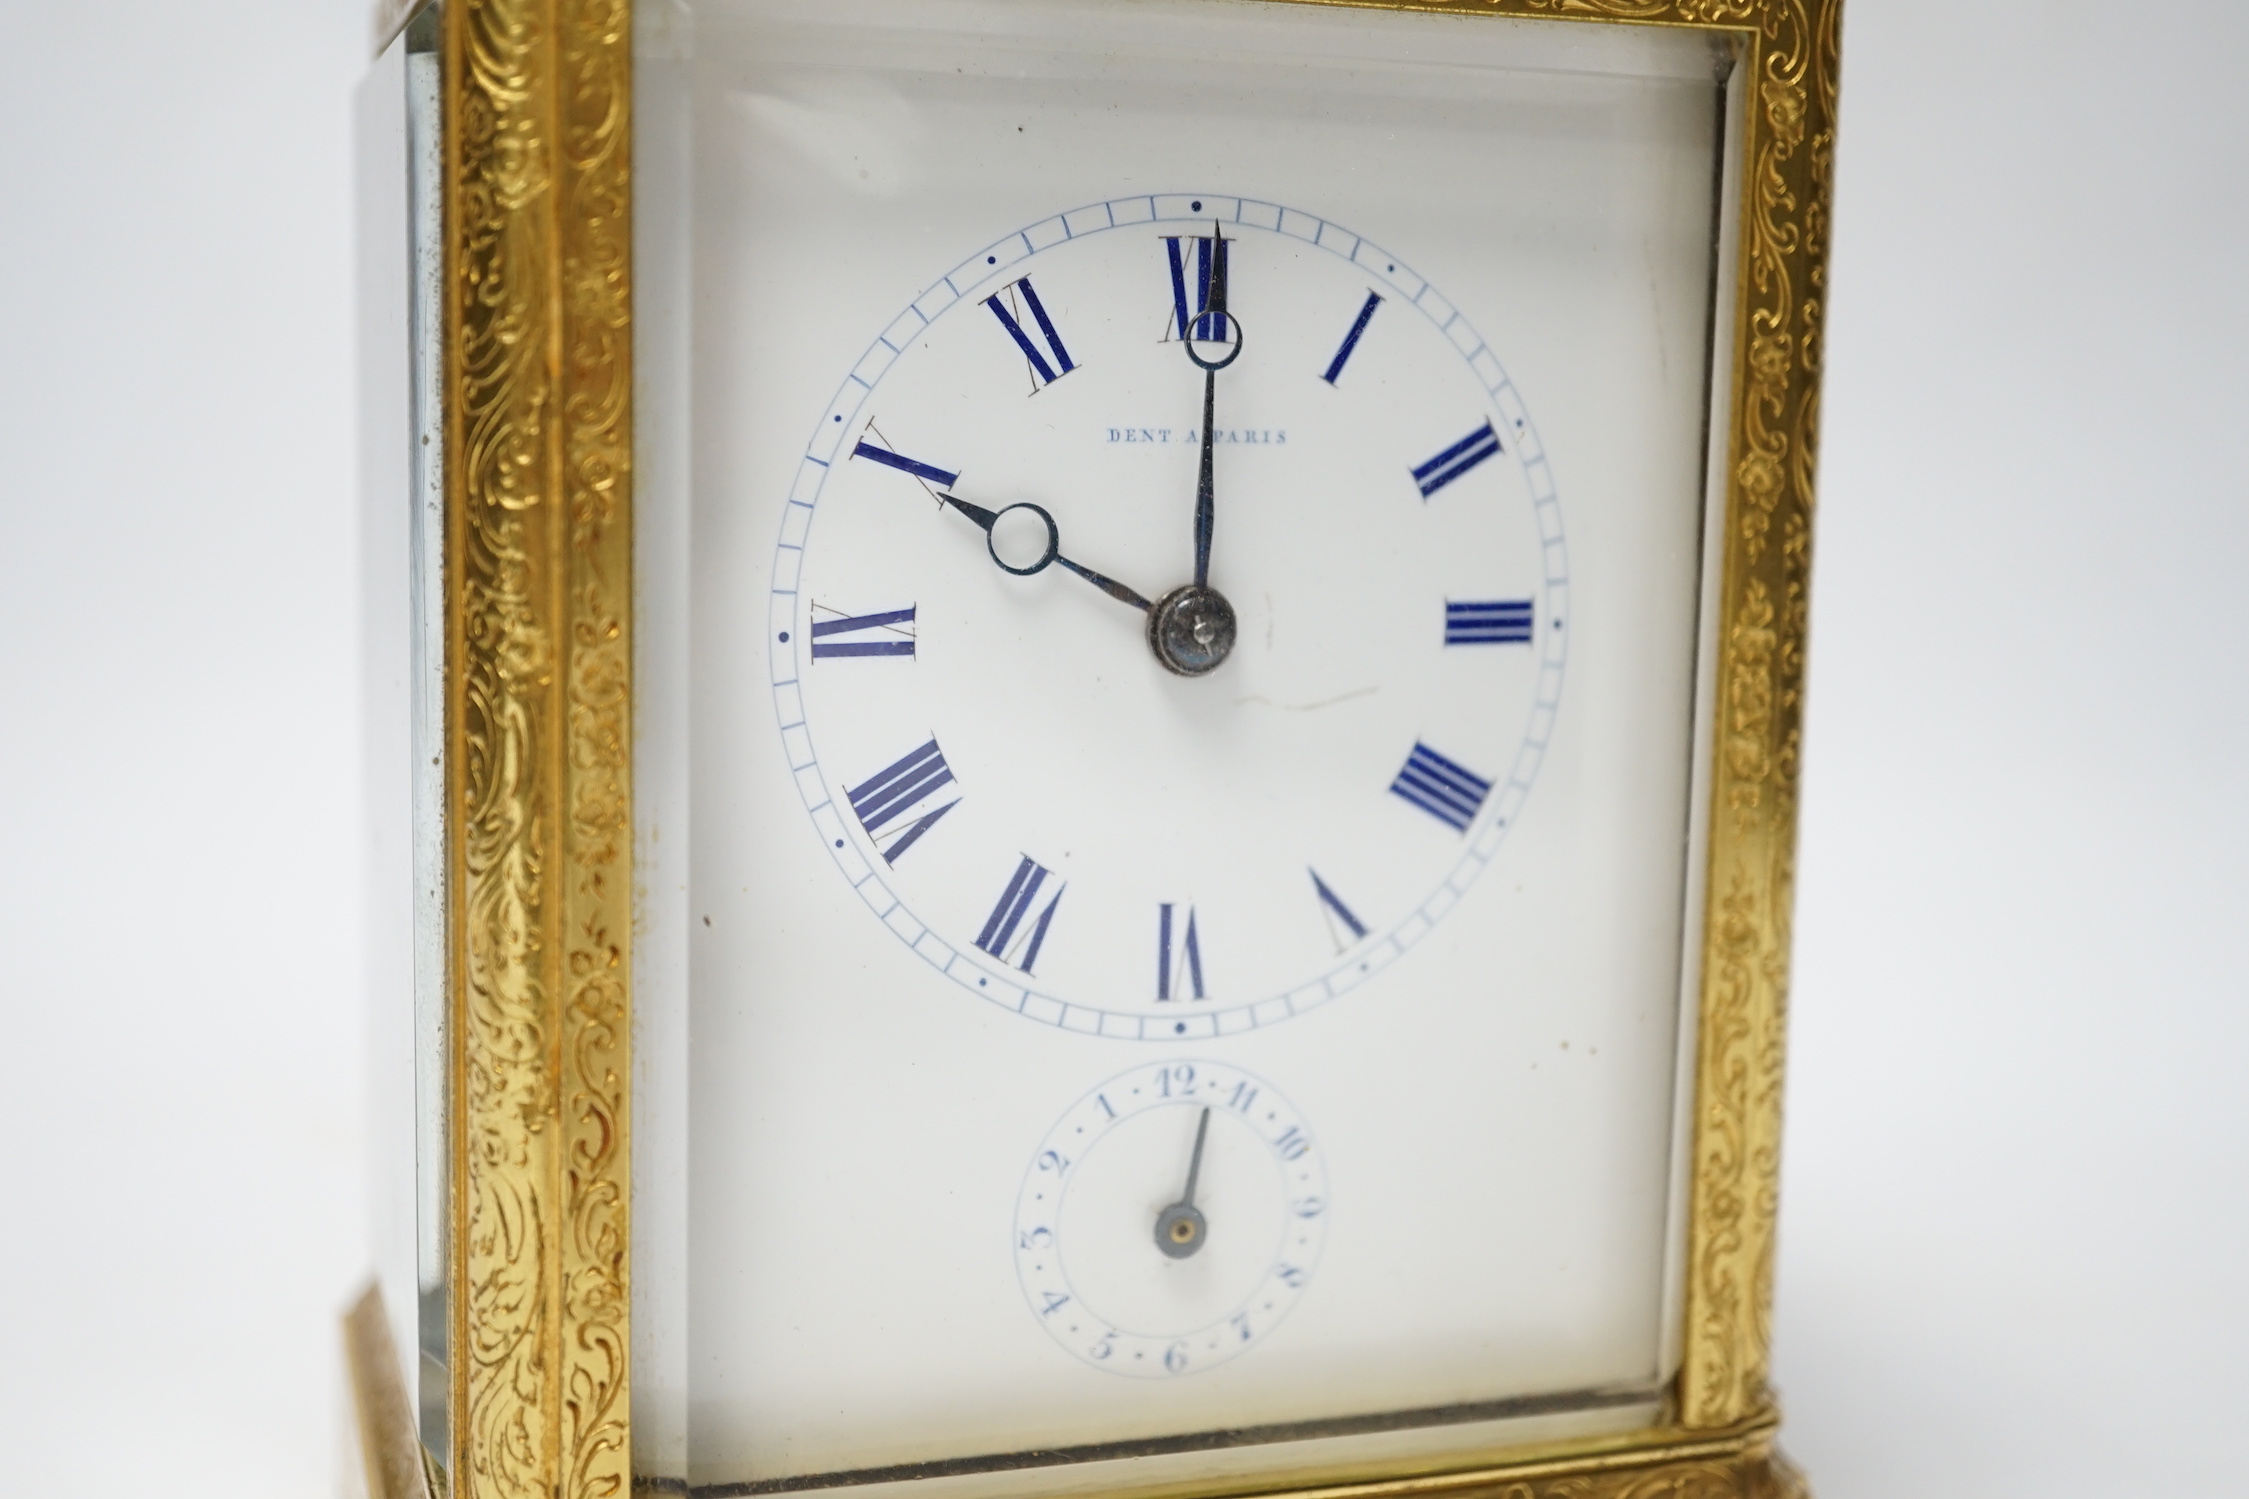 An ornate 19th century French repeating carriage clock with alarm, signed Dent a Paris, 13.5cm high